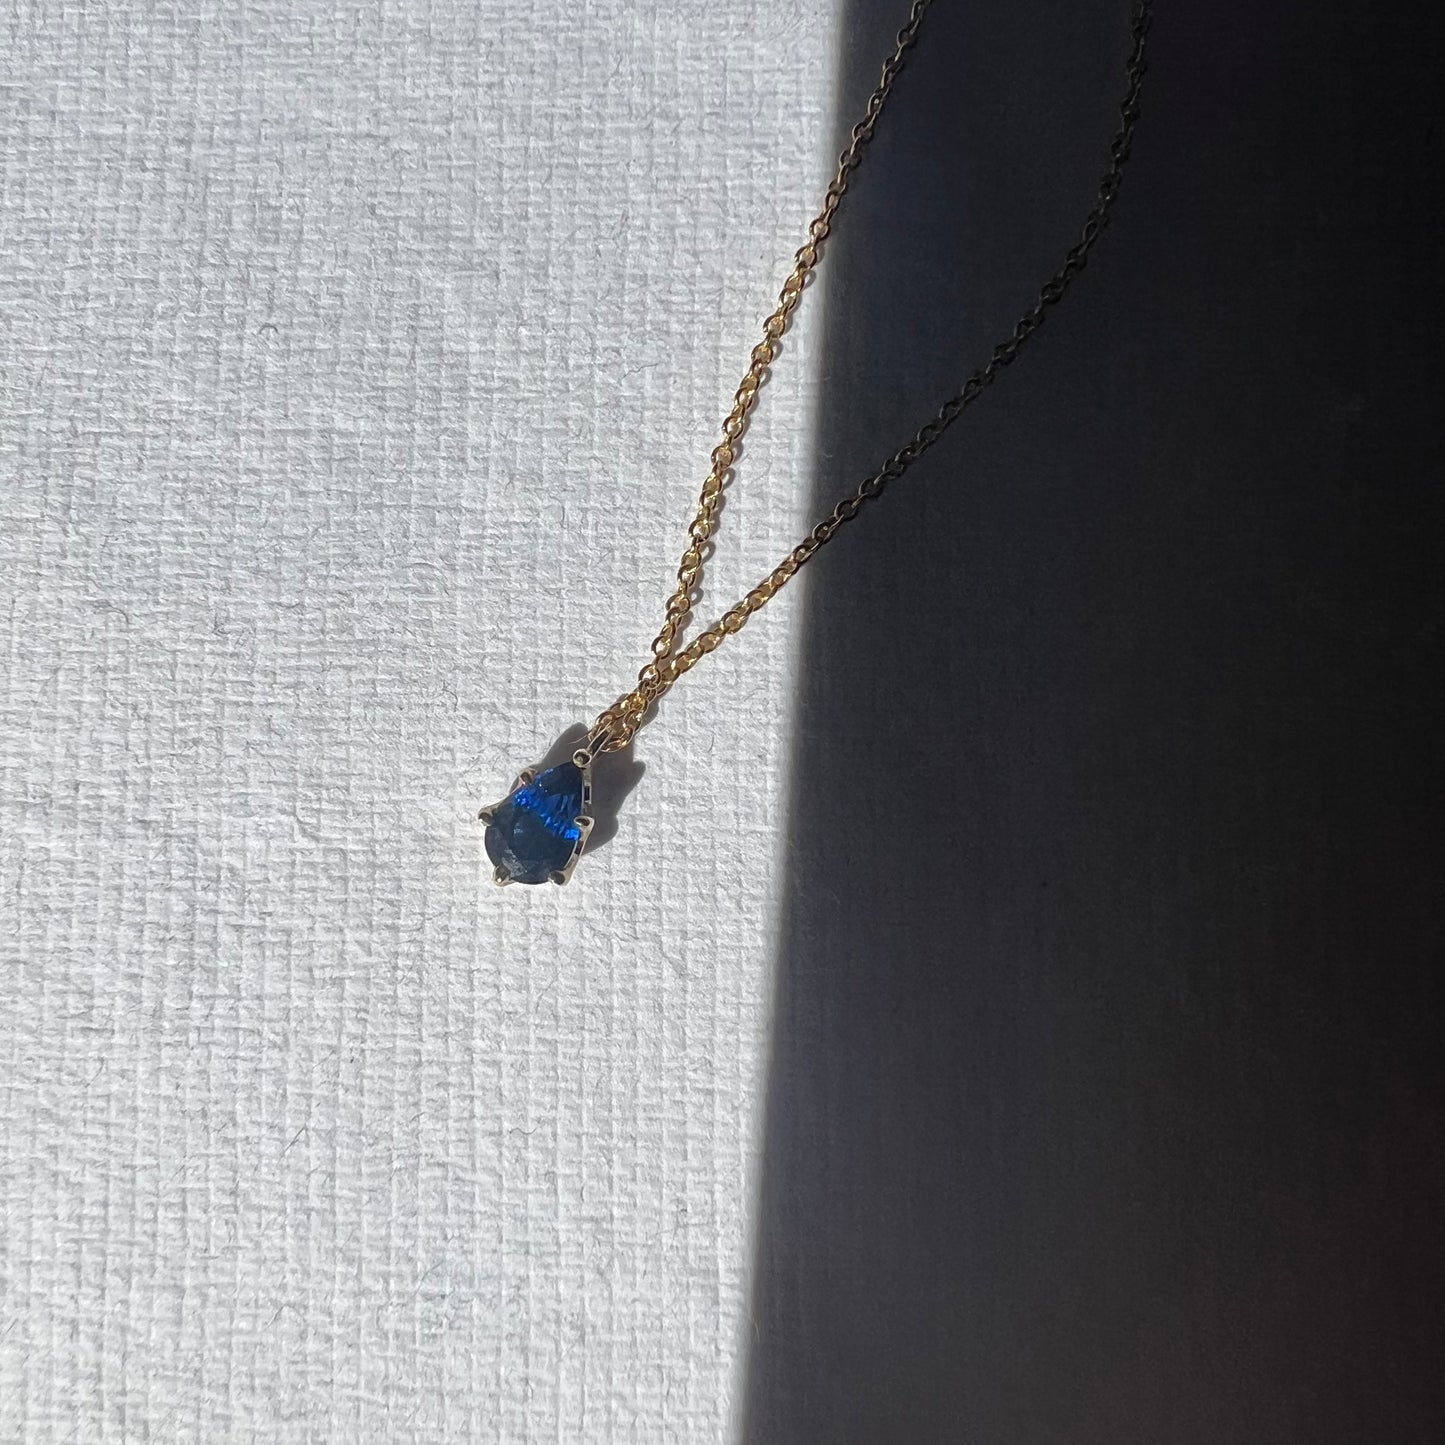 SAPPHIRE PEAR SOLITAIRE NECKLACE